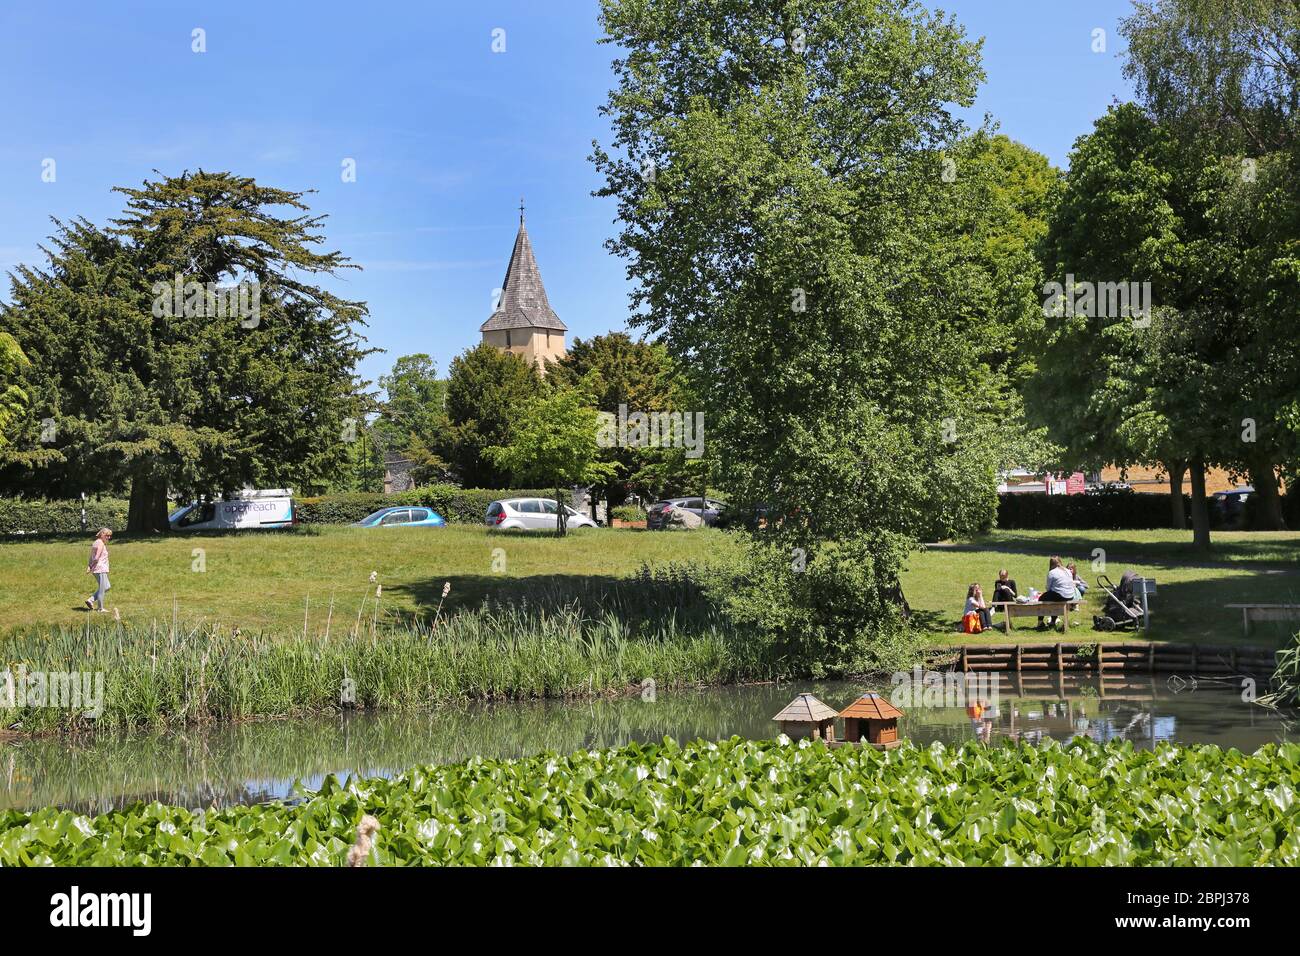 The duck pond and old village green in Sanderstead, Surrey, an affluent village in South Croydon, UK. All Saints church (centre) dates from 1230. Stock Photo